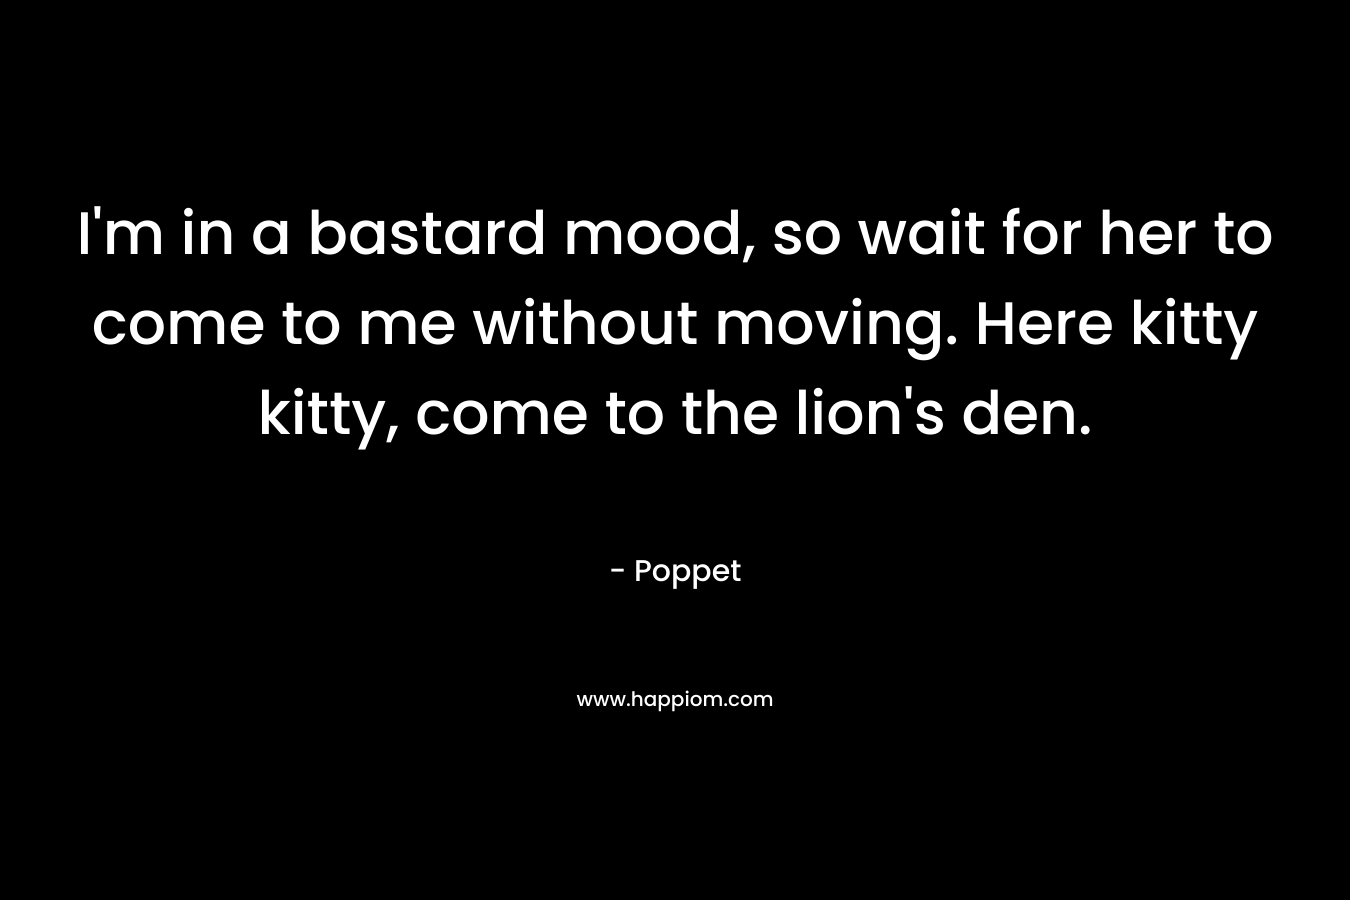 I’m in a bastard mood, so wait for her to come to me without moving. Here kitty kitty, come to the lion’s den. – Poppet